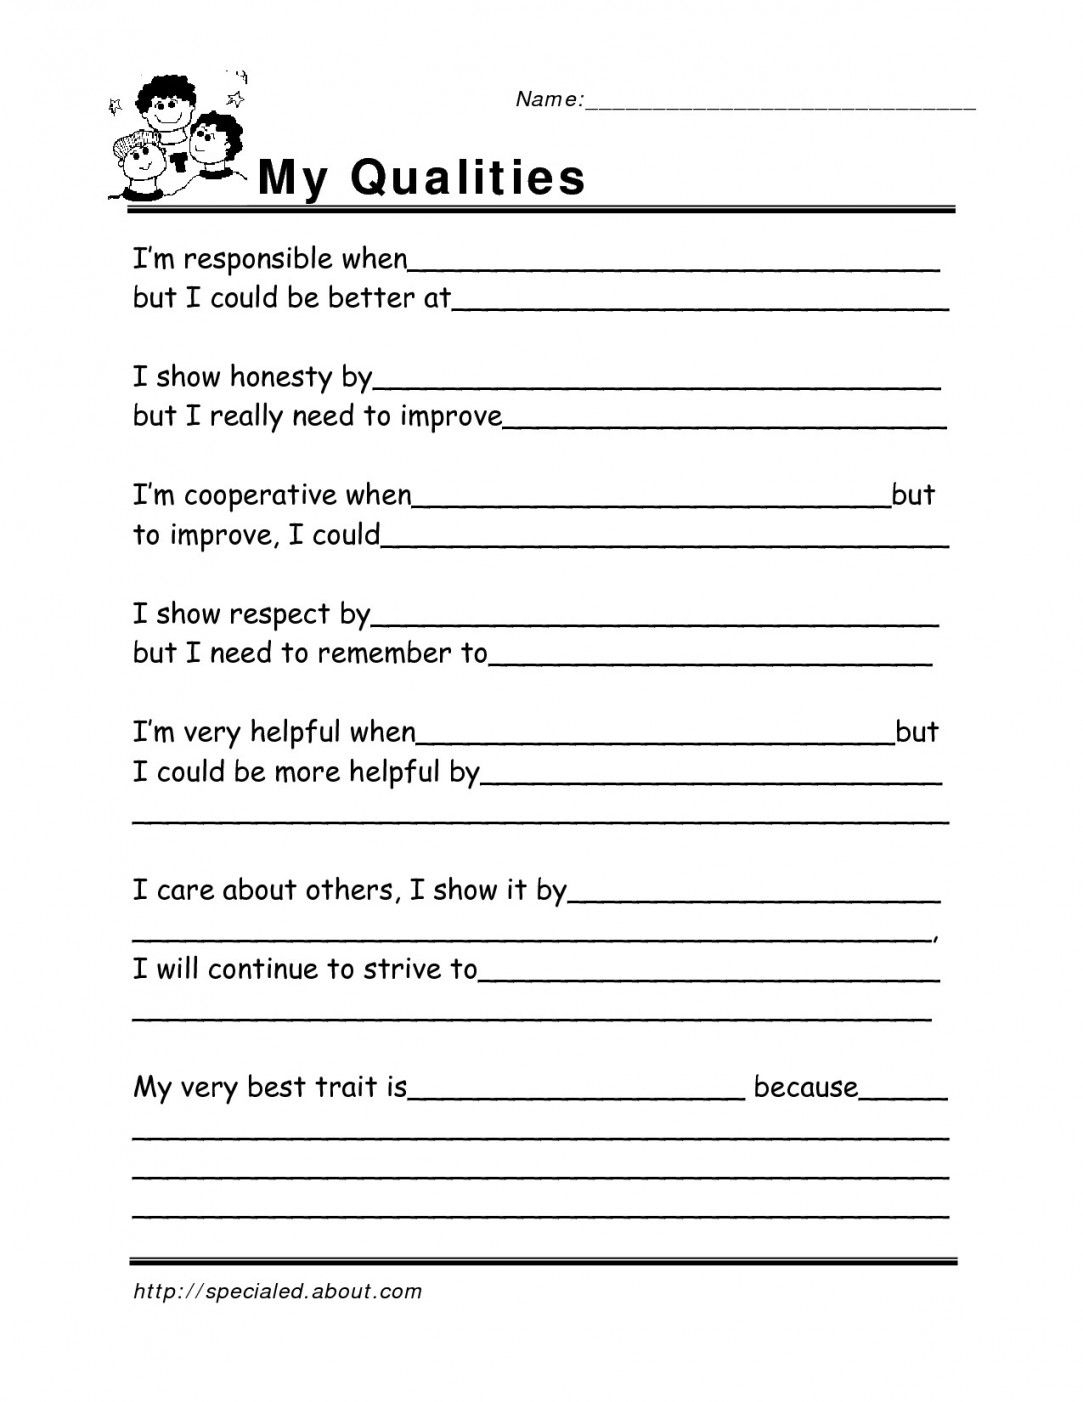 Free Printable Life Skills Worksheets For Adults | Lostranquillos - Free Printable Life Skills Worksheets For Adults